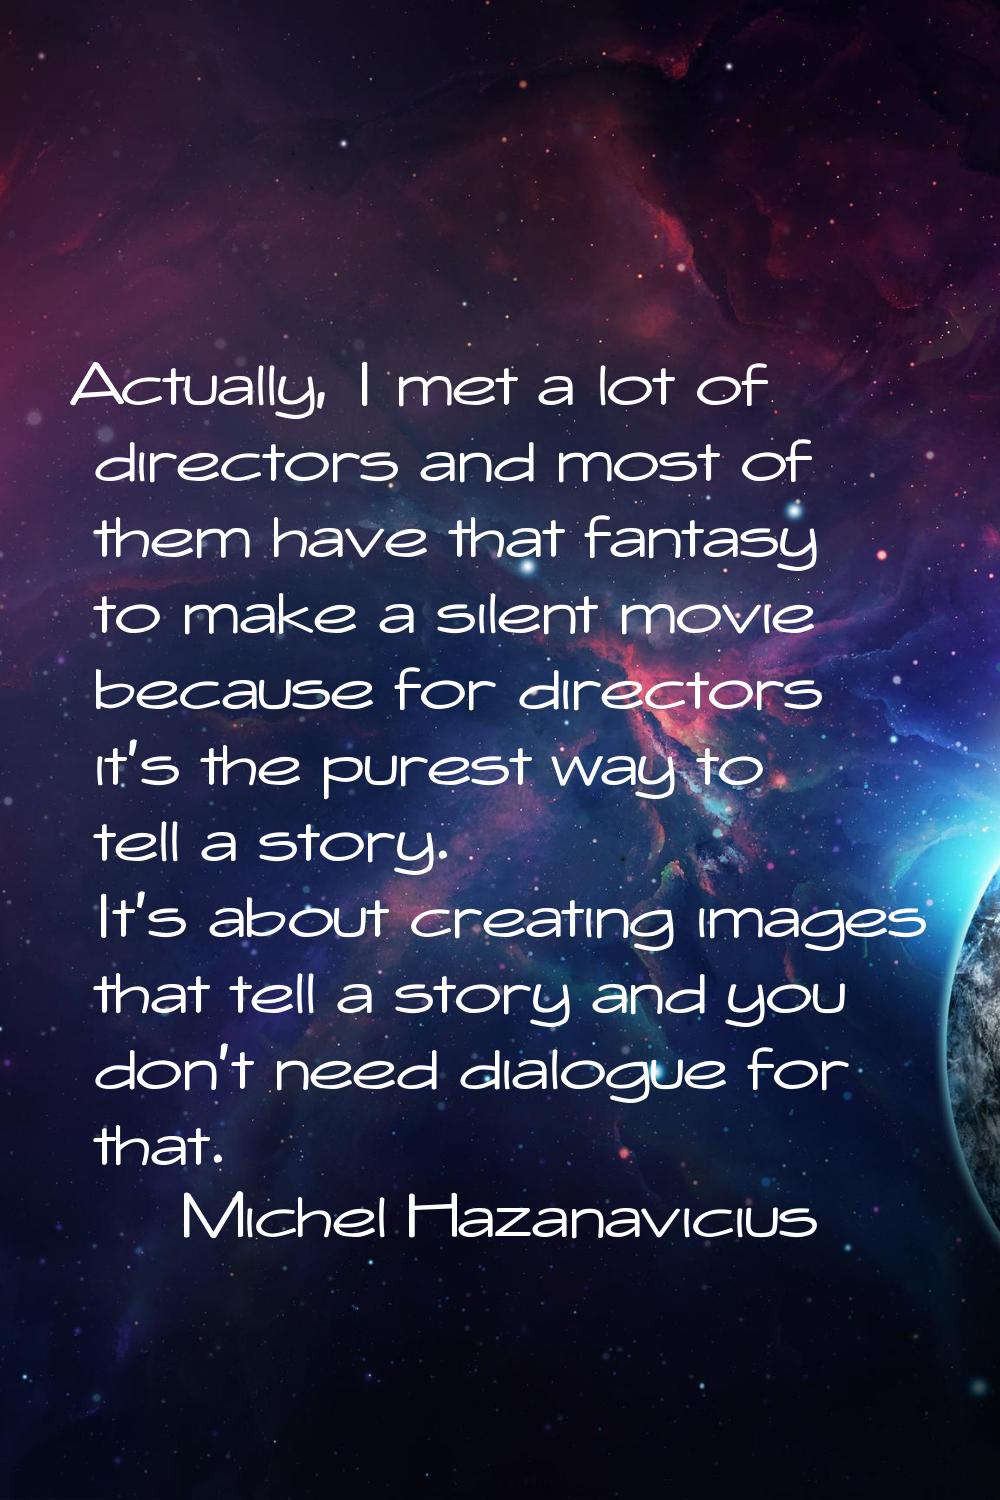 Actually, I met a lot of directors and most of them have that fantasy to make a silent movie becaus